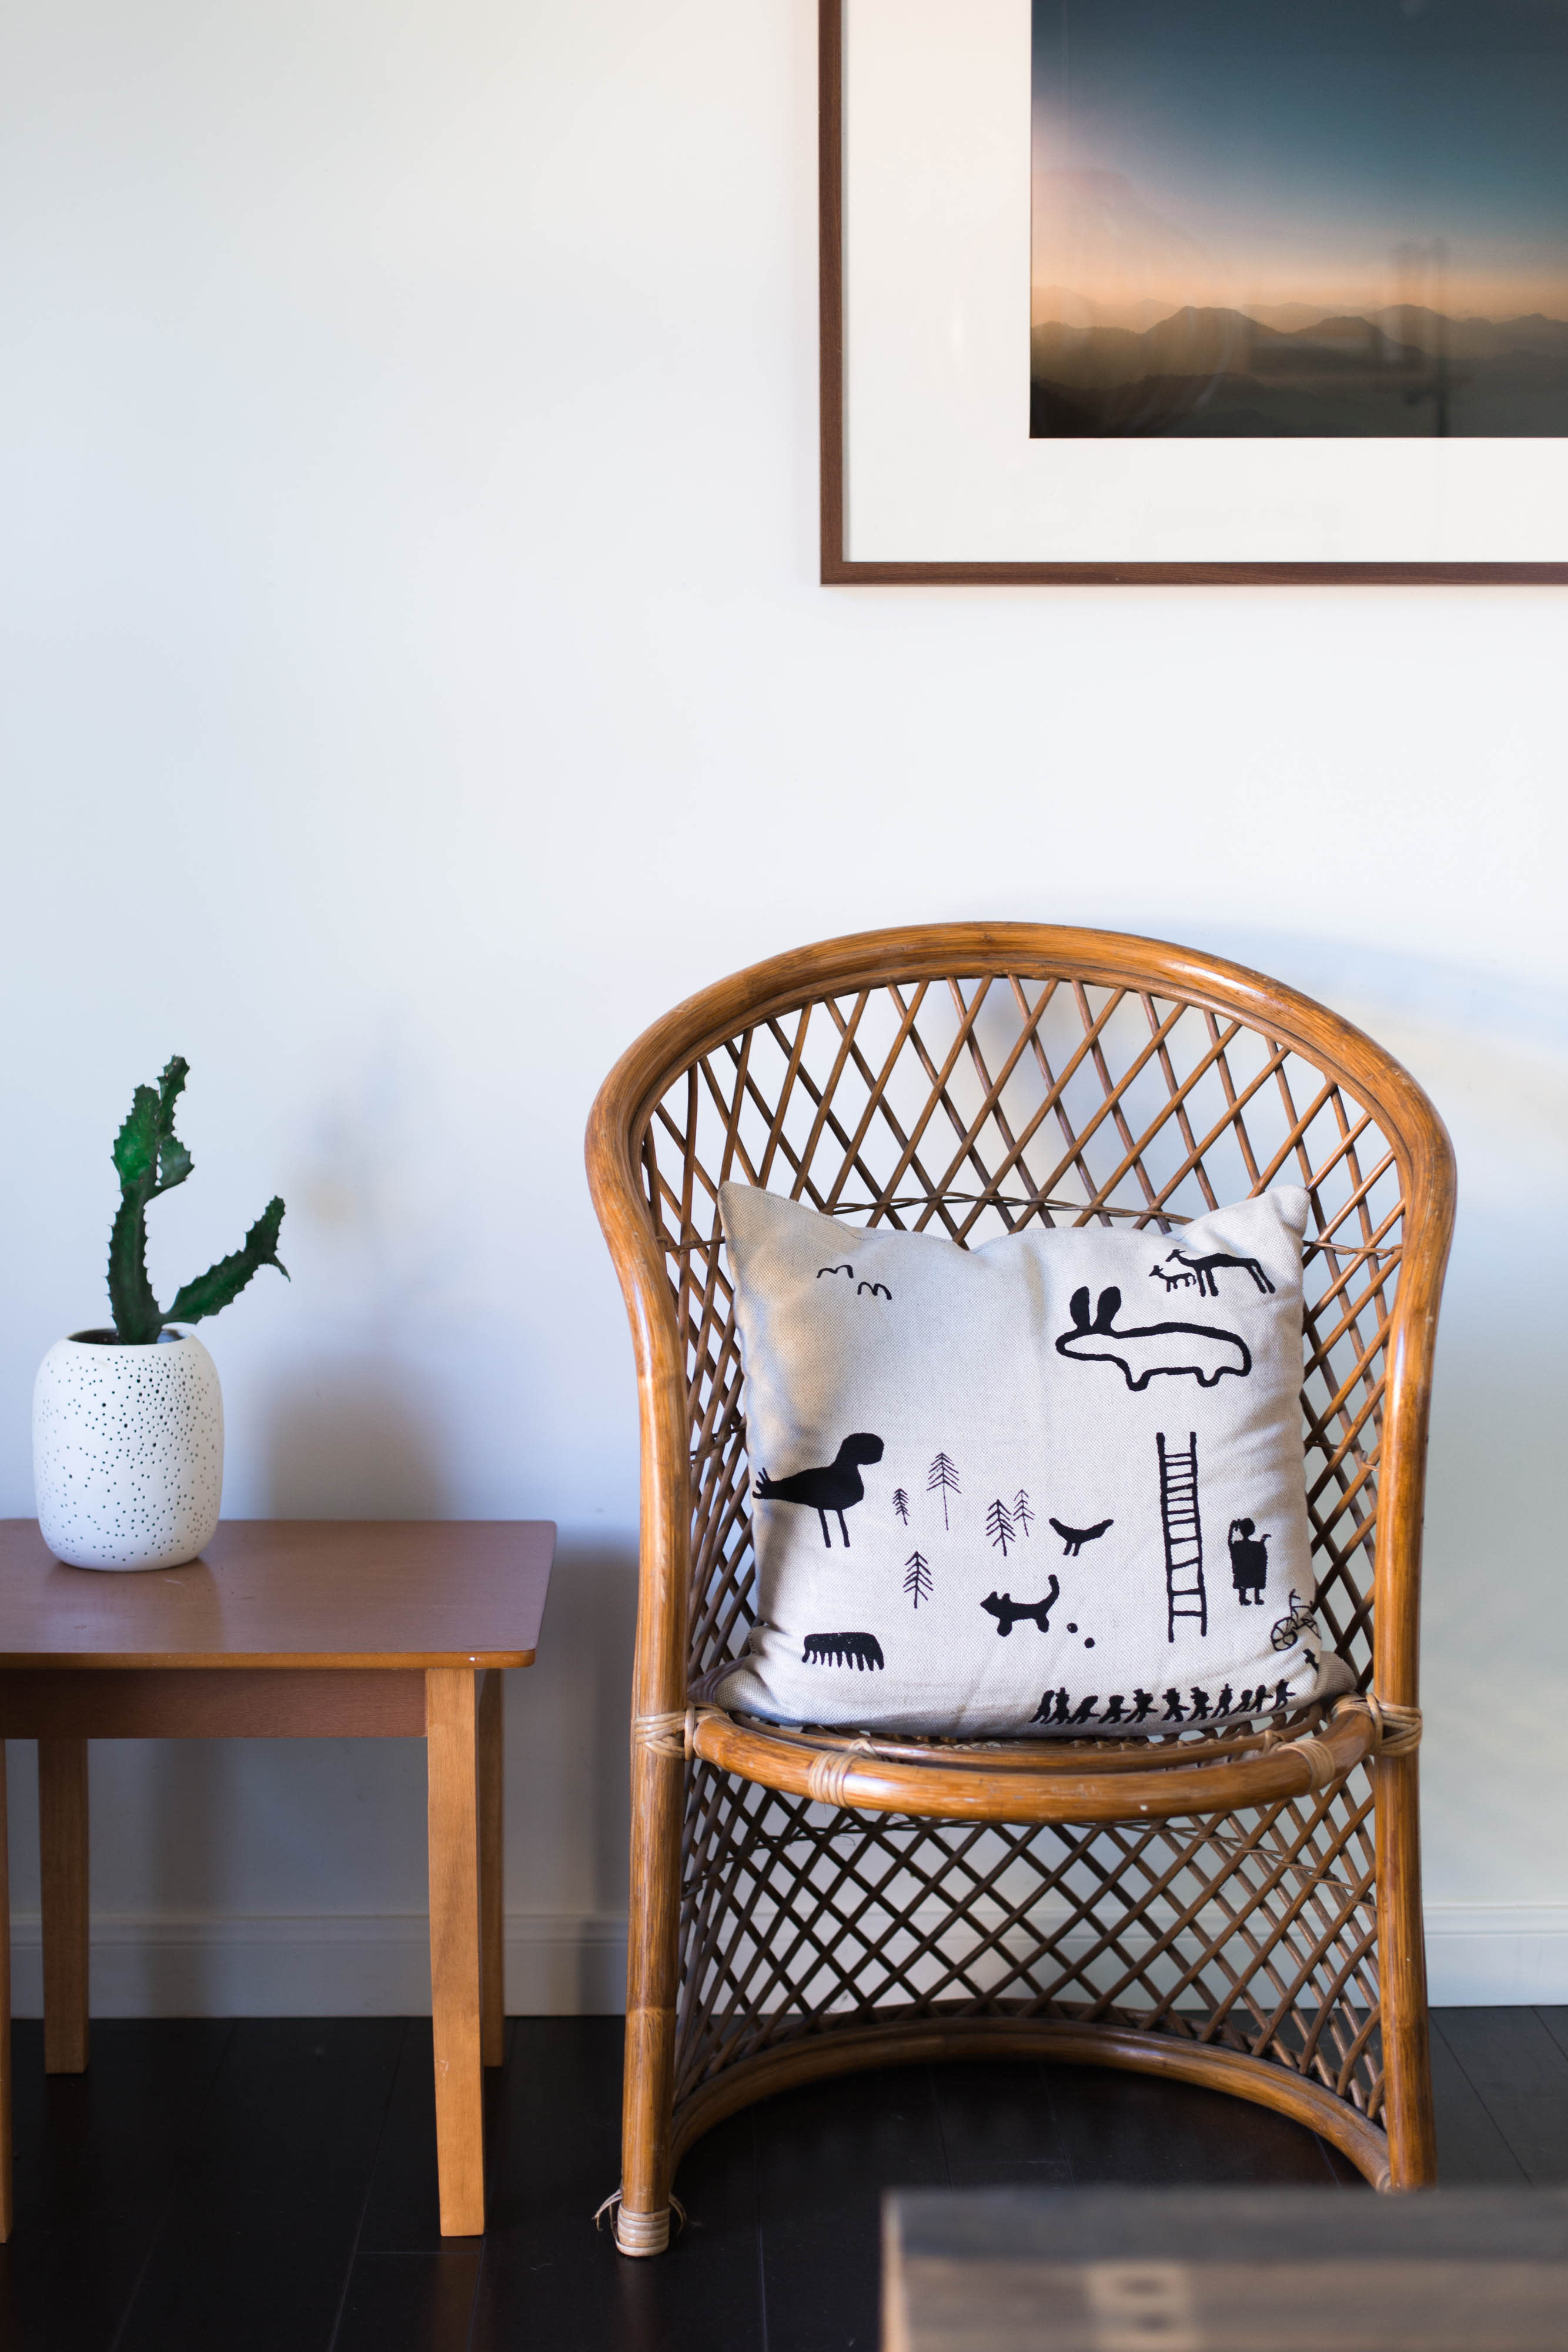 9 Ways to Minimalist Decor That Will Make Your Home Clutter-free